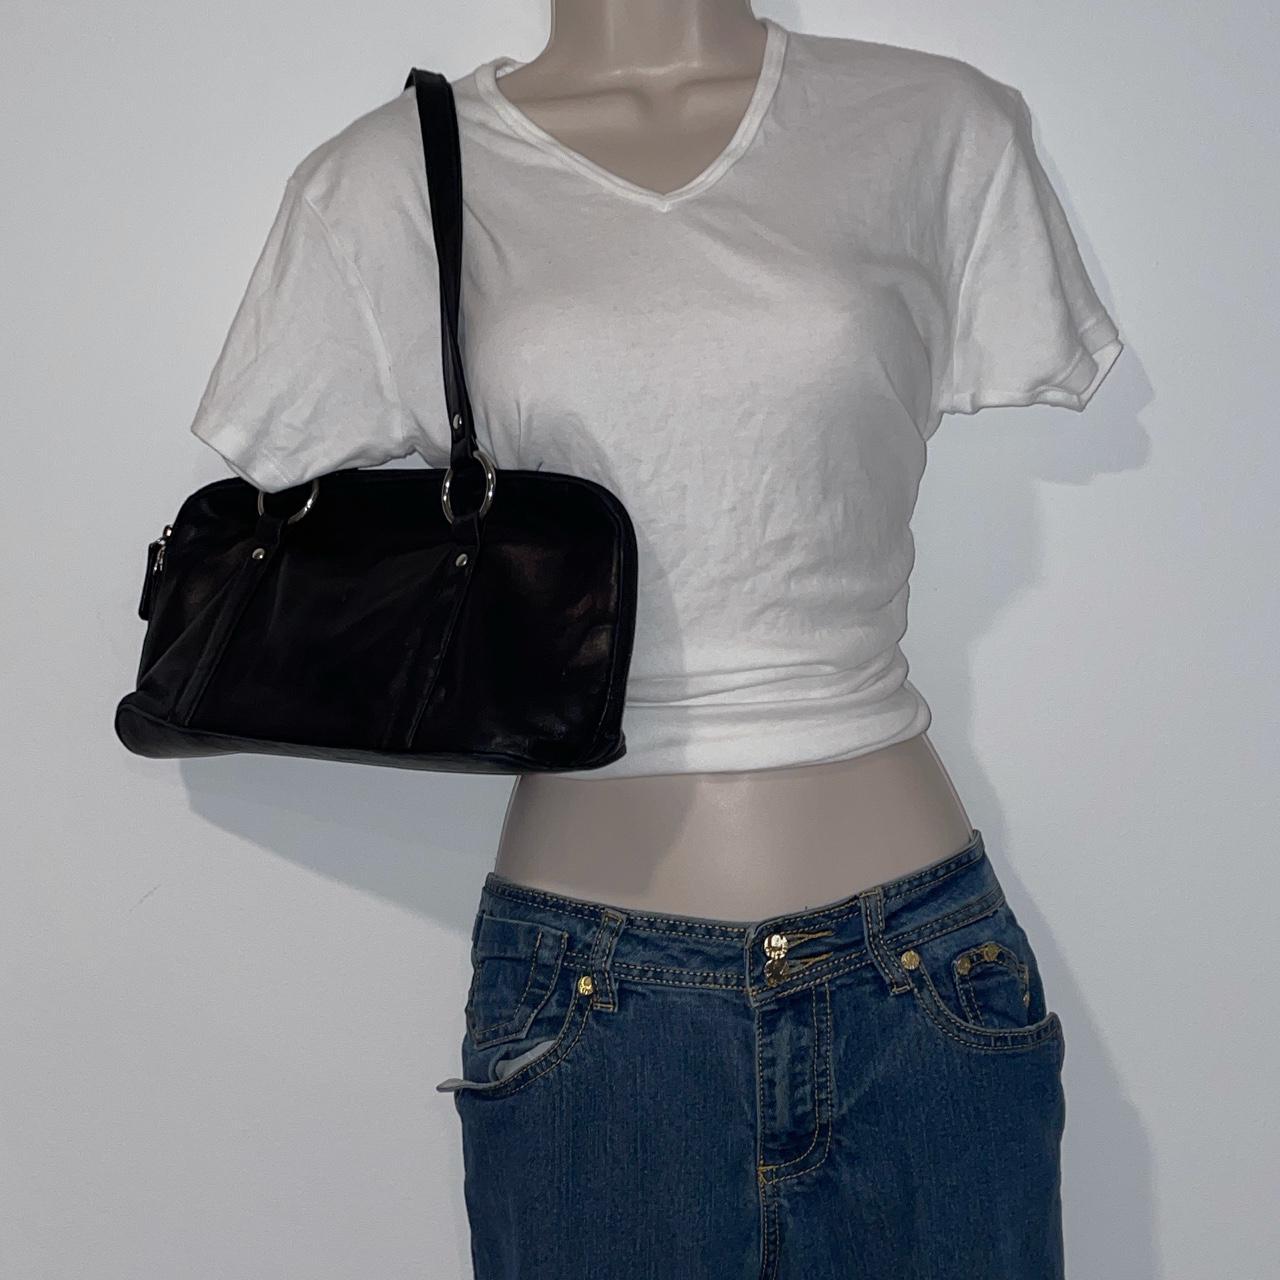 Product Image 1 - Amazing black purse with a